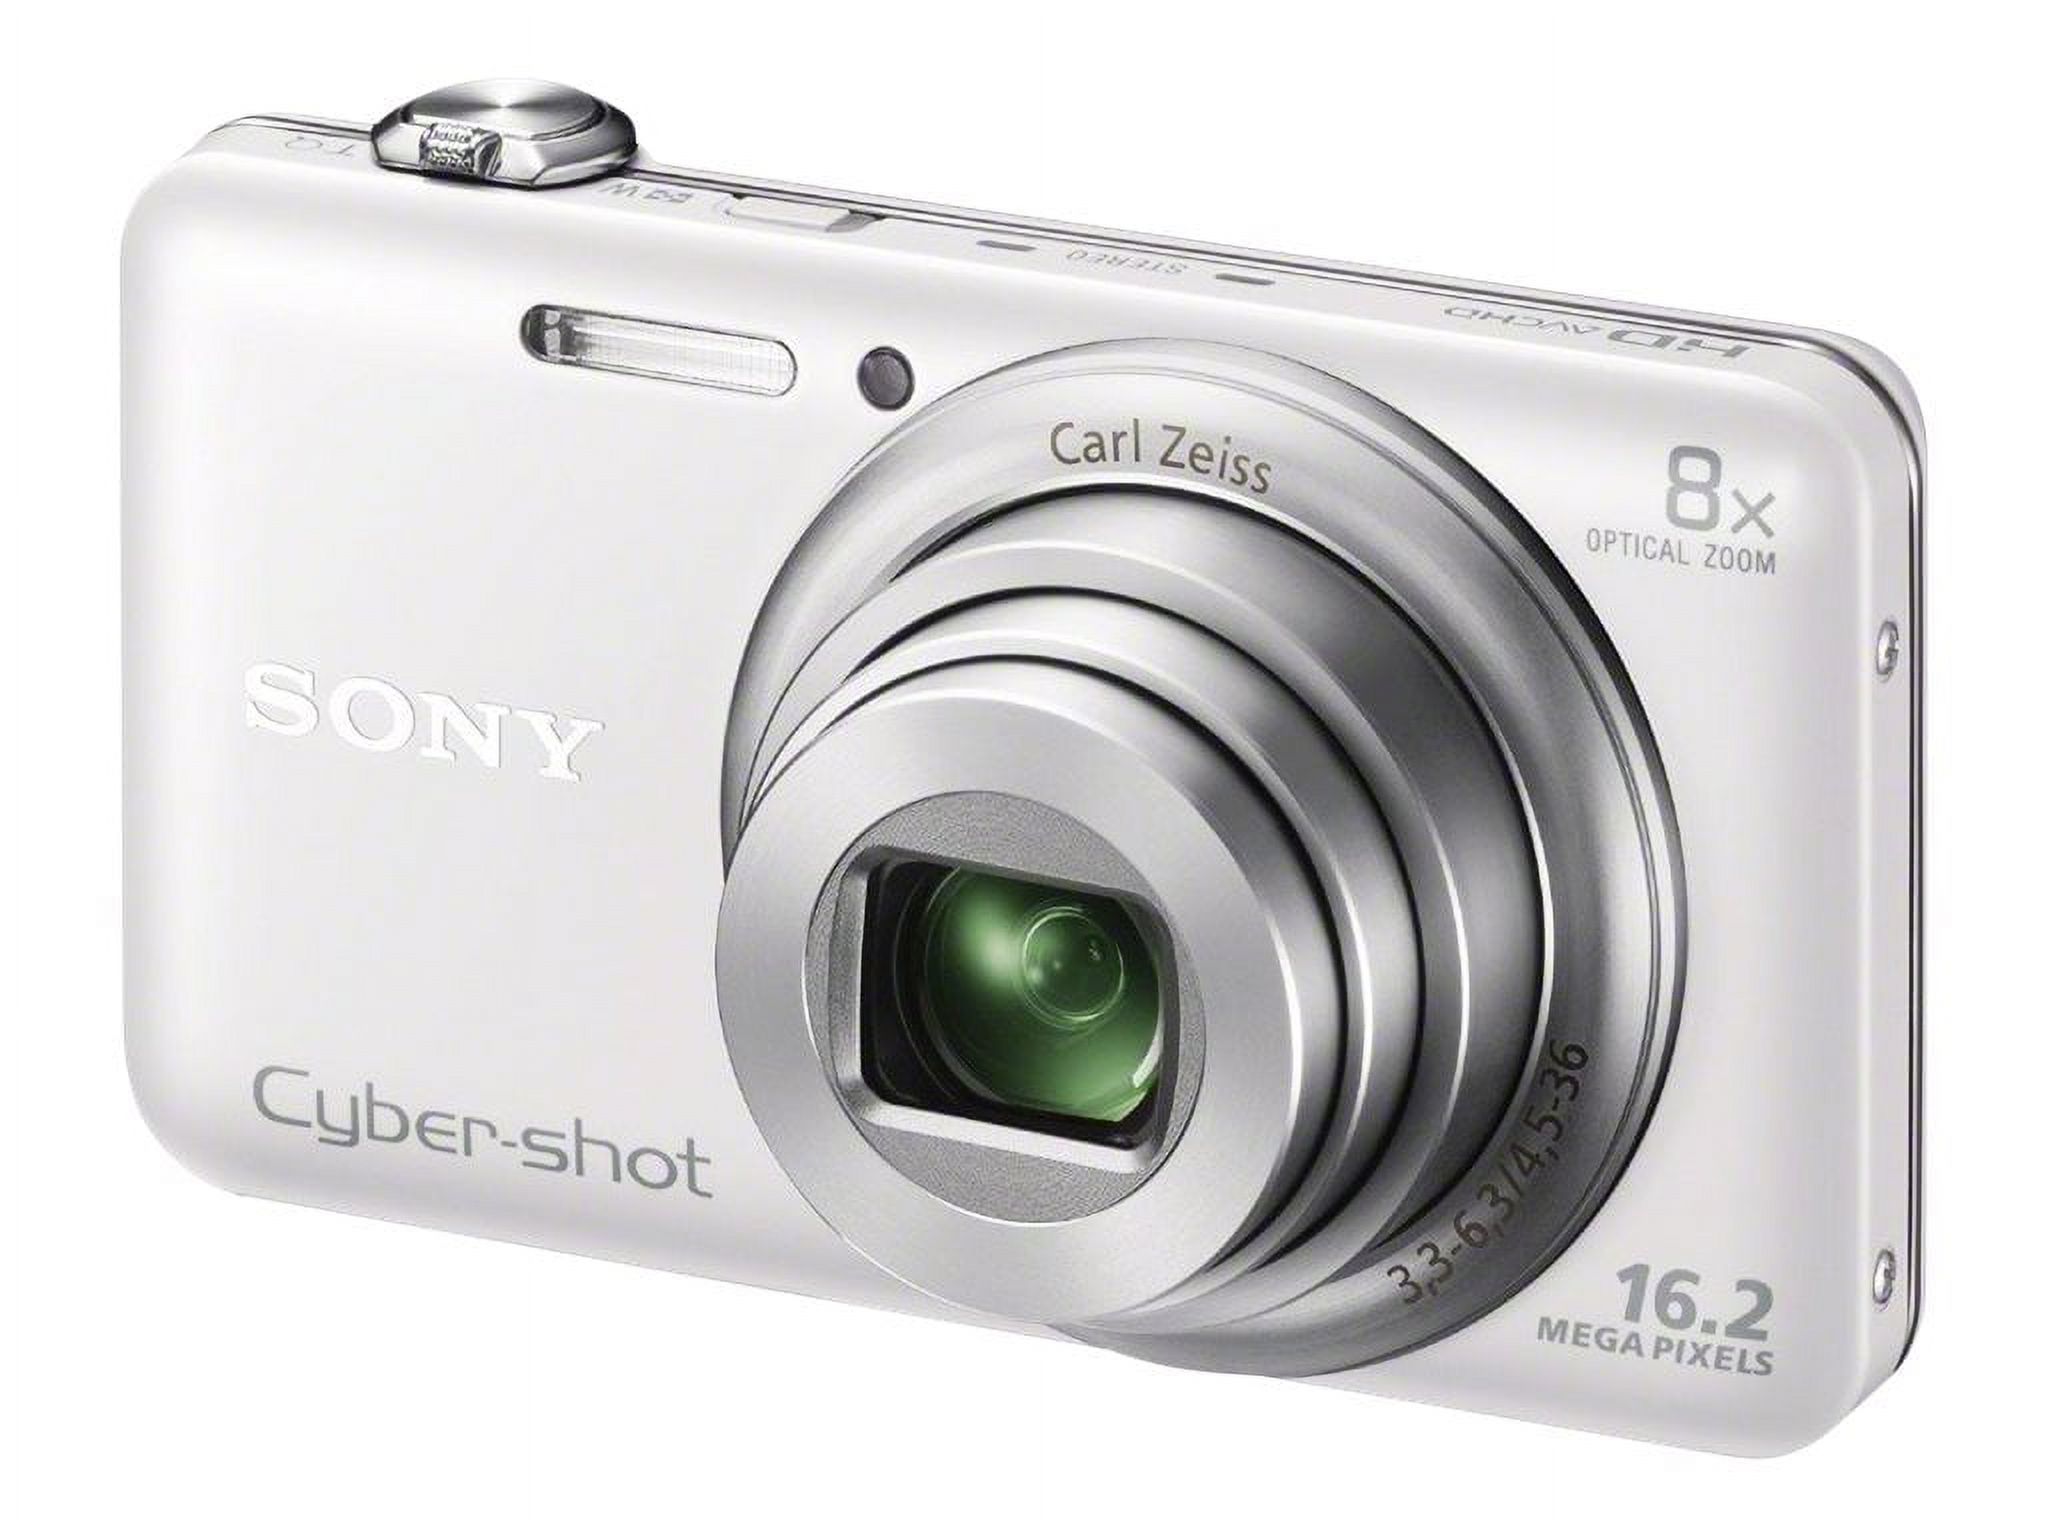 Sony Cyber-shot DSC-WX80 - Digital camera - compact - 16.2 MP - 8x optical zoom - Carl Zeiss - Wi-Fi - white - image 1 of 4